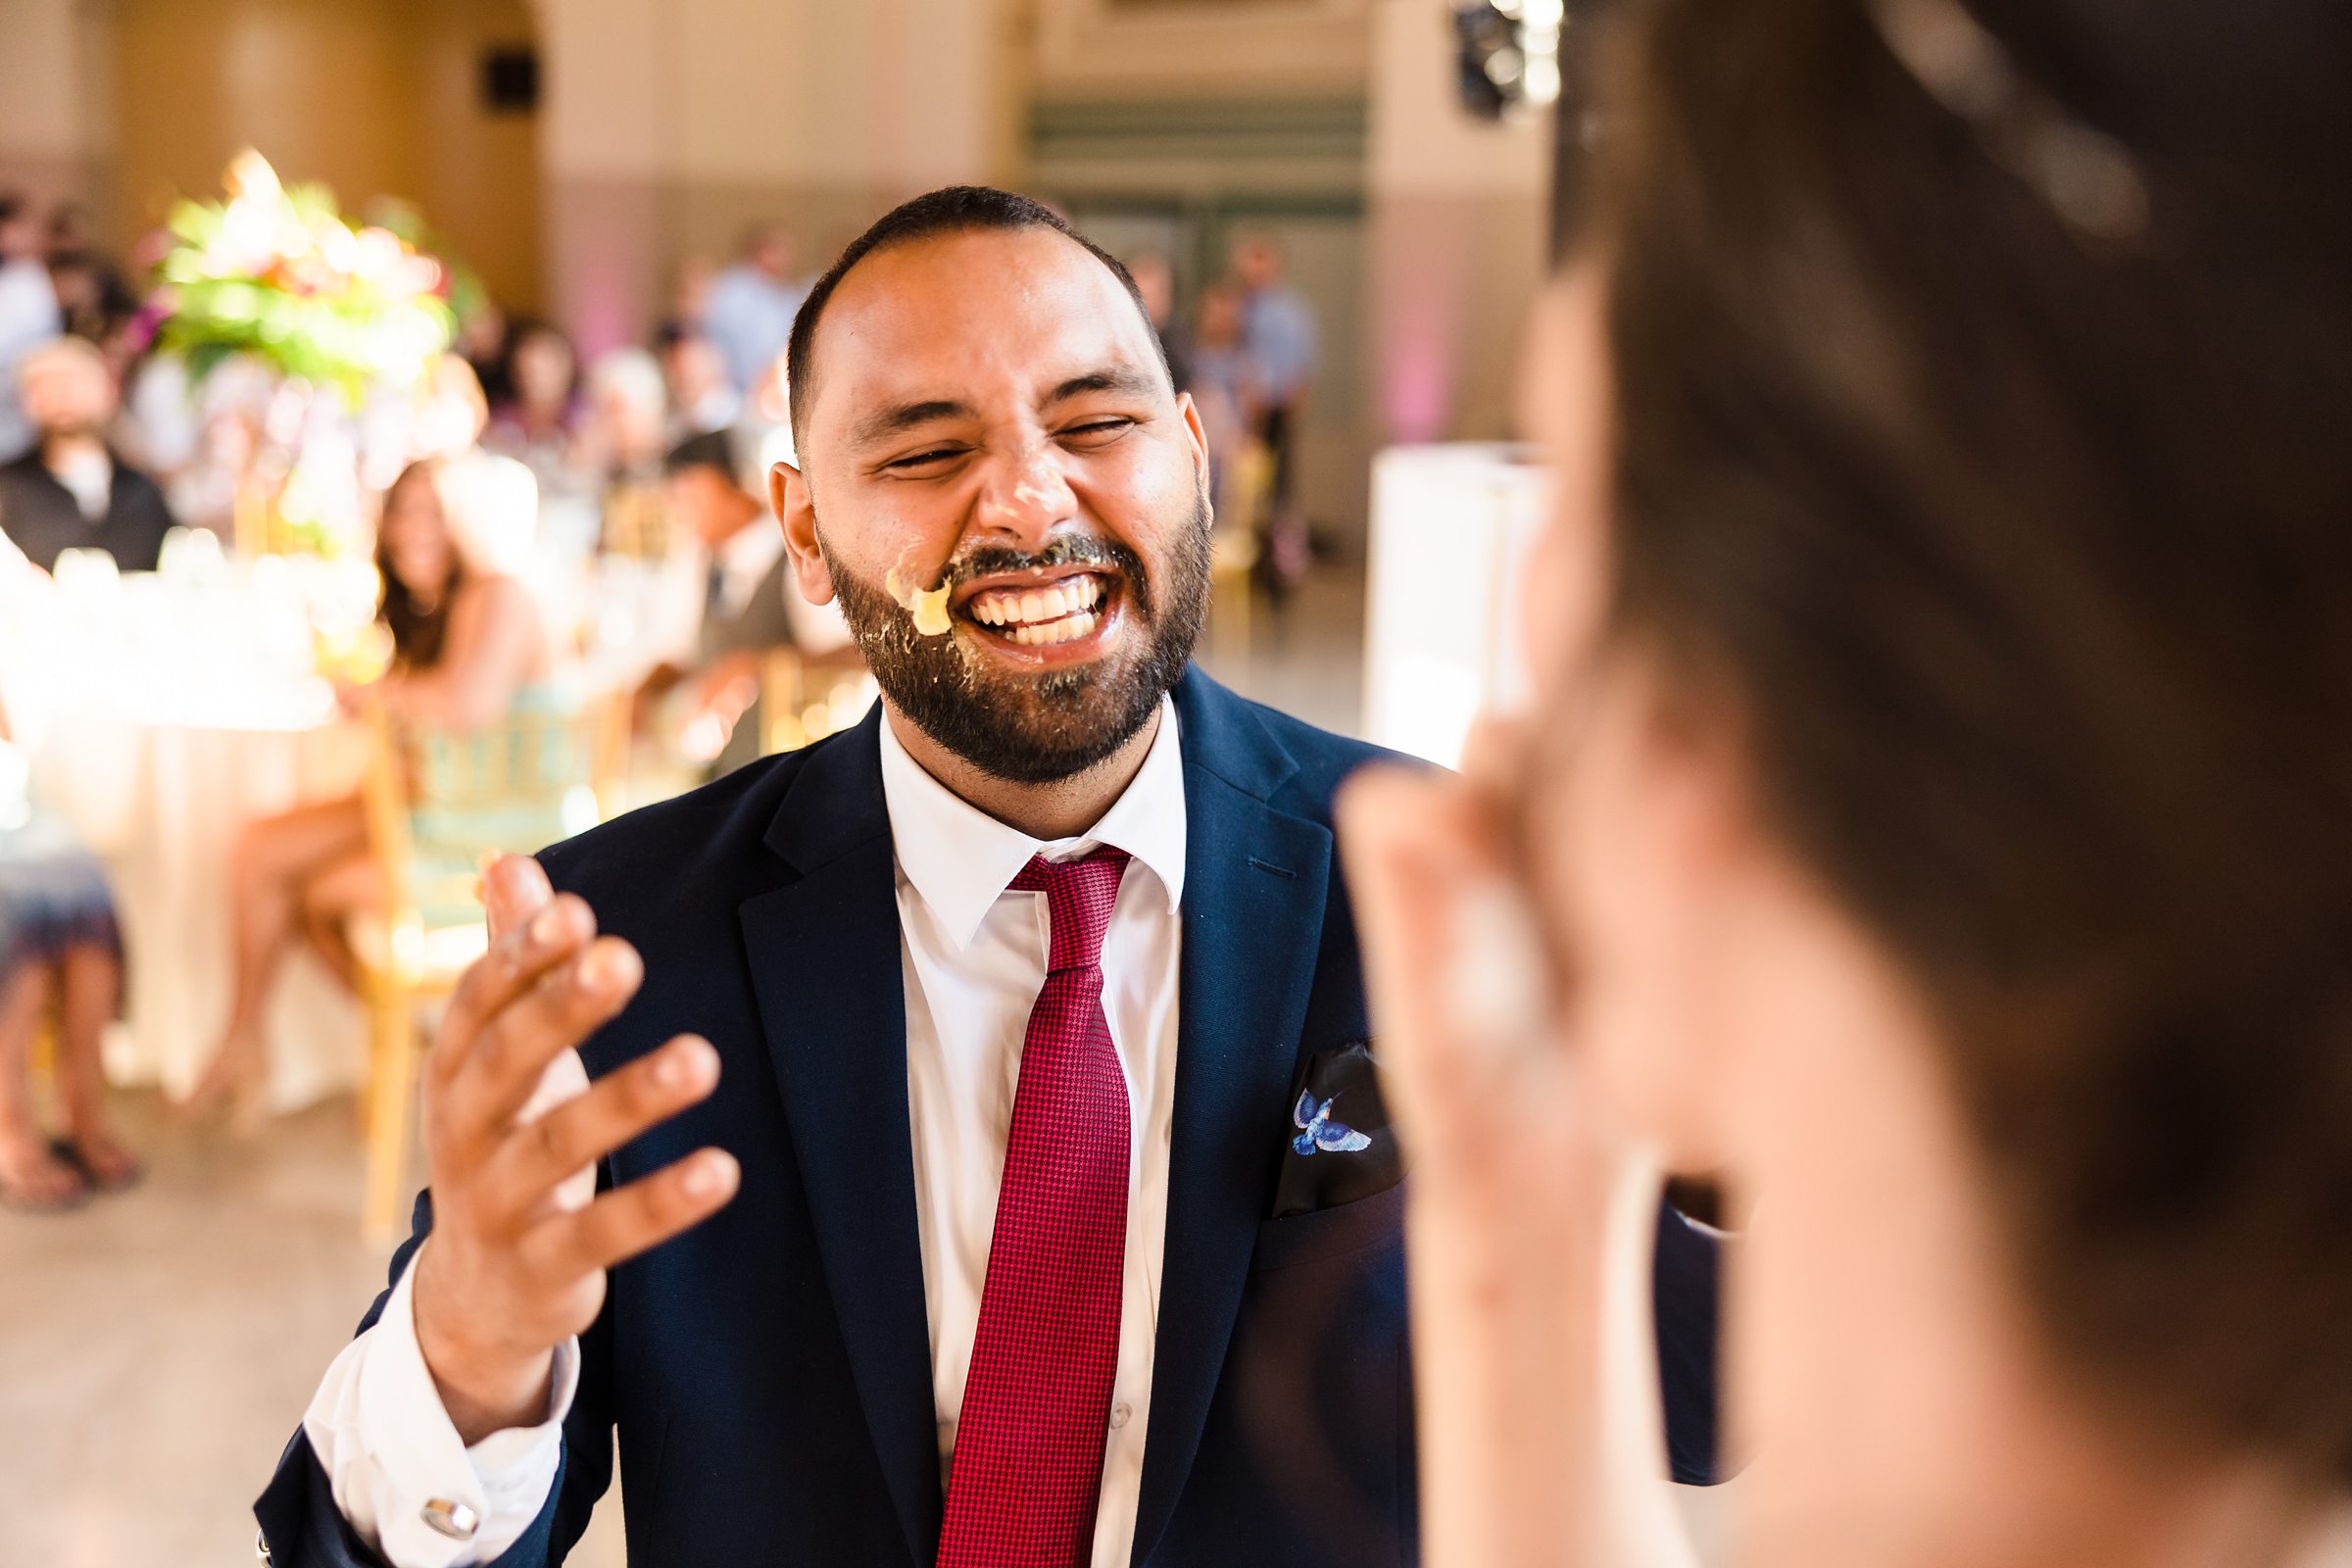 Groom laughs during his wedding at the Union Station in Joliet, Illinois.